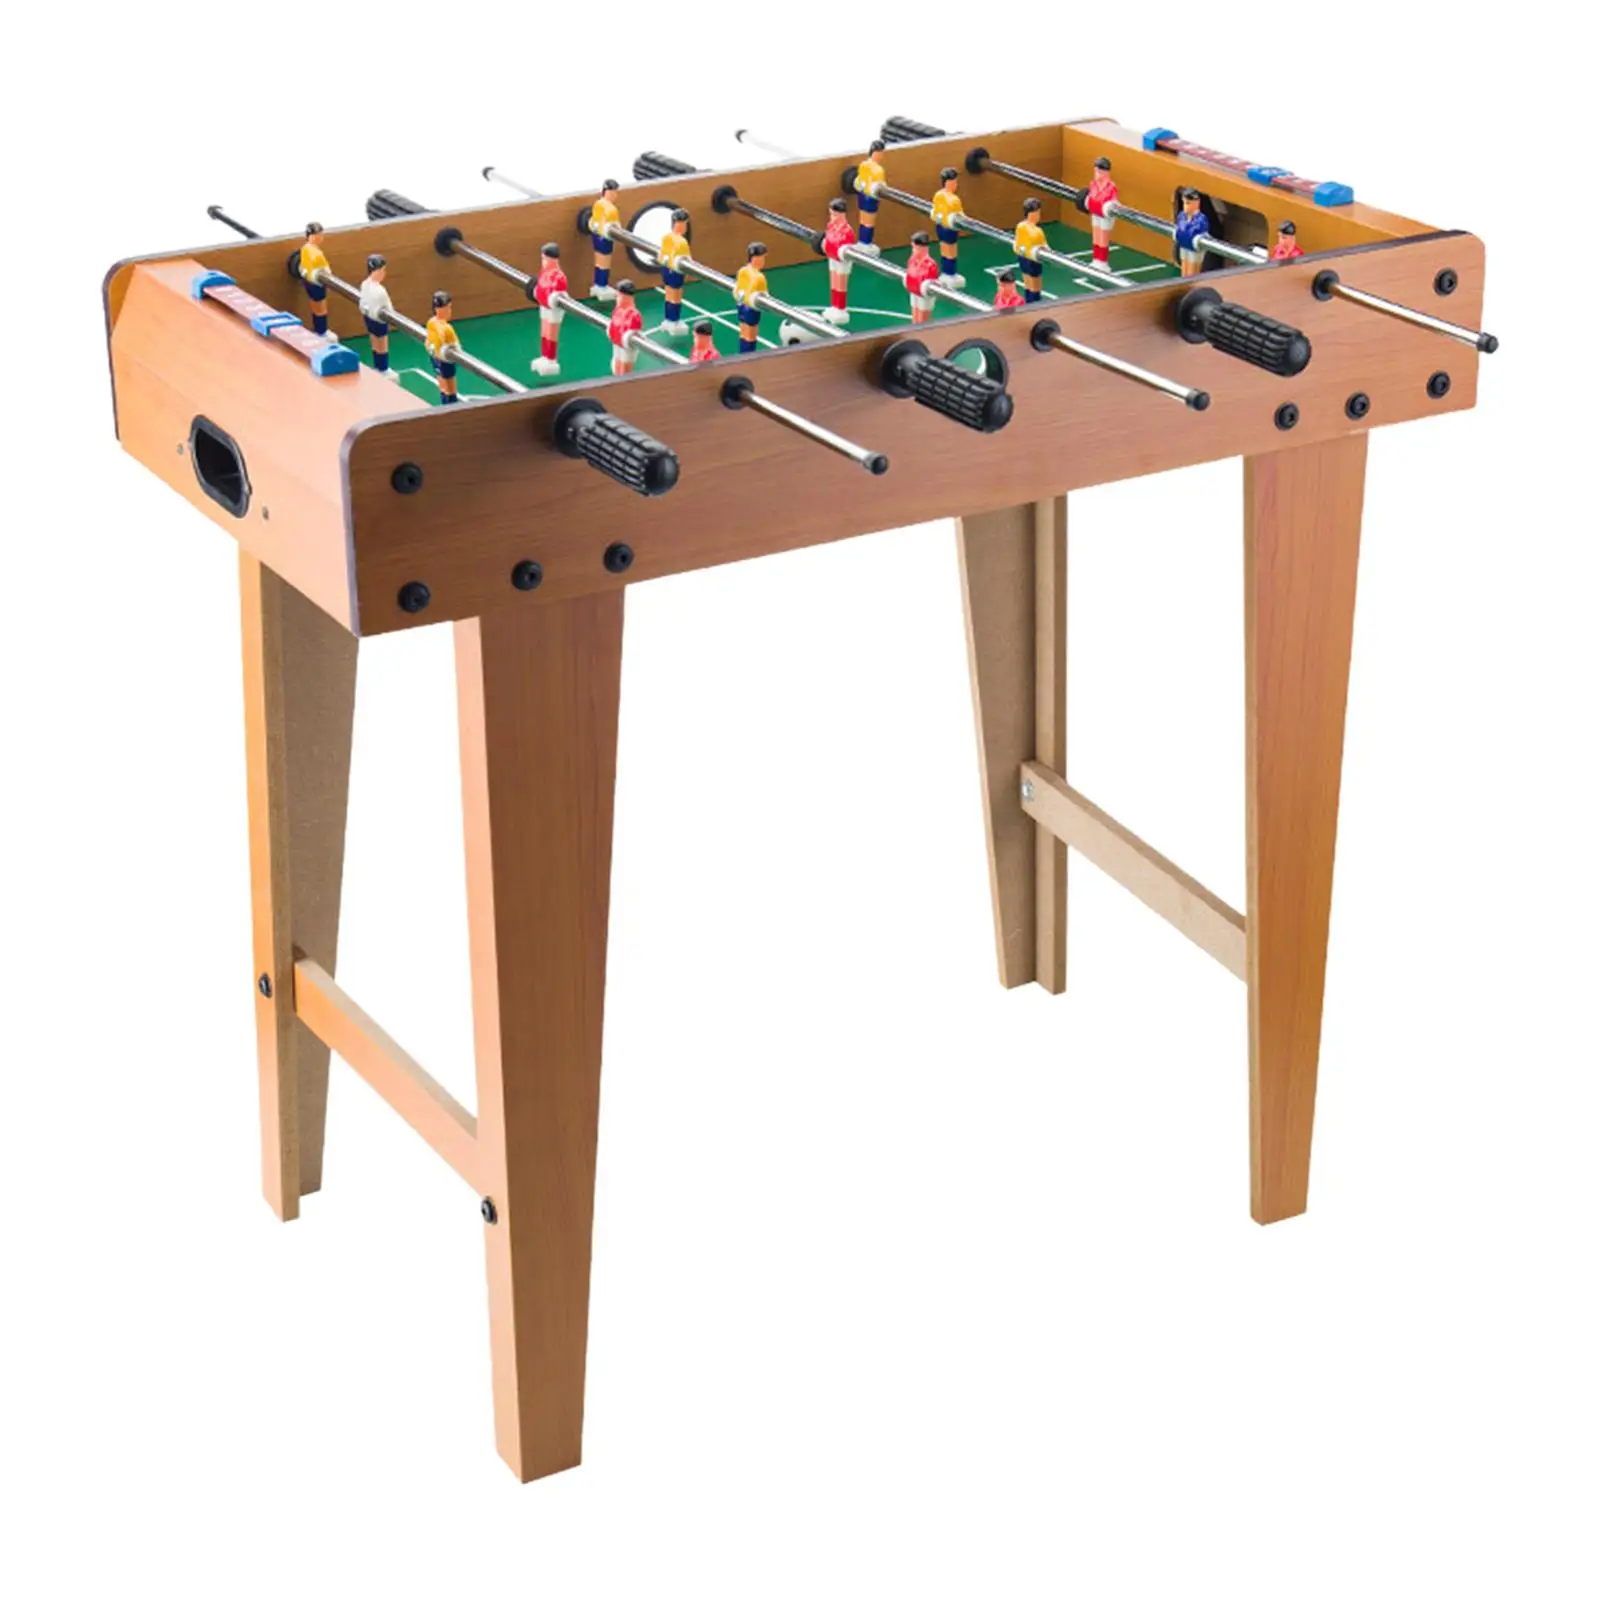 Portable Foosball Table Toy Tabletop Football Soccer Game with Ball Play Sports